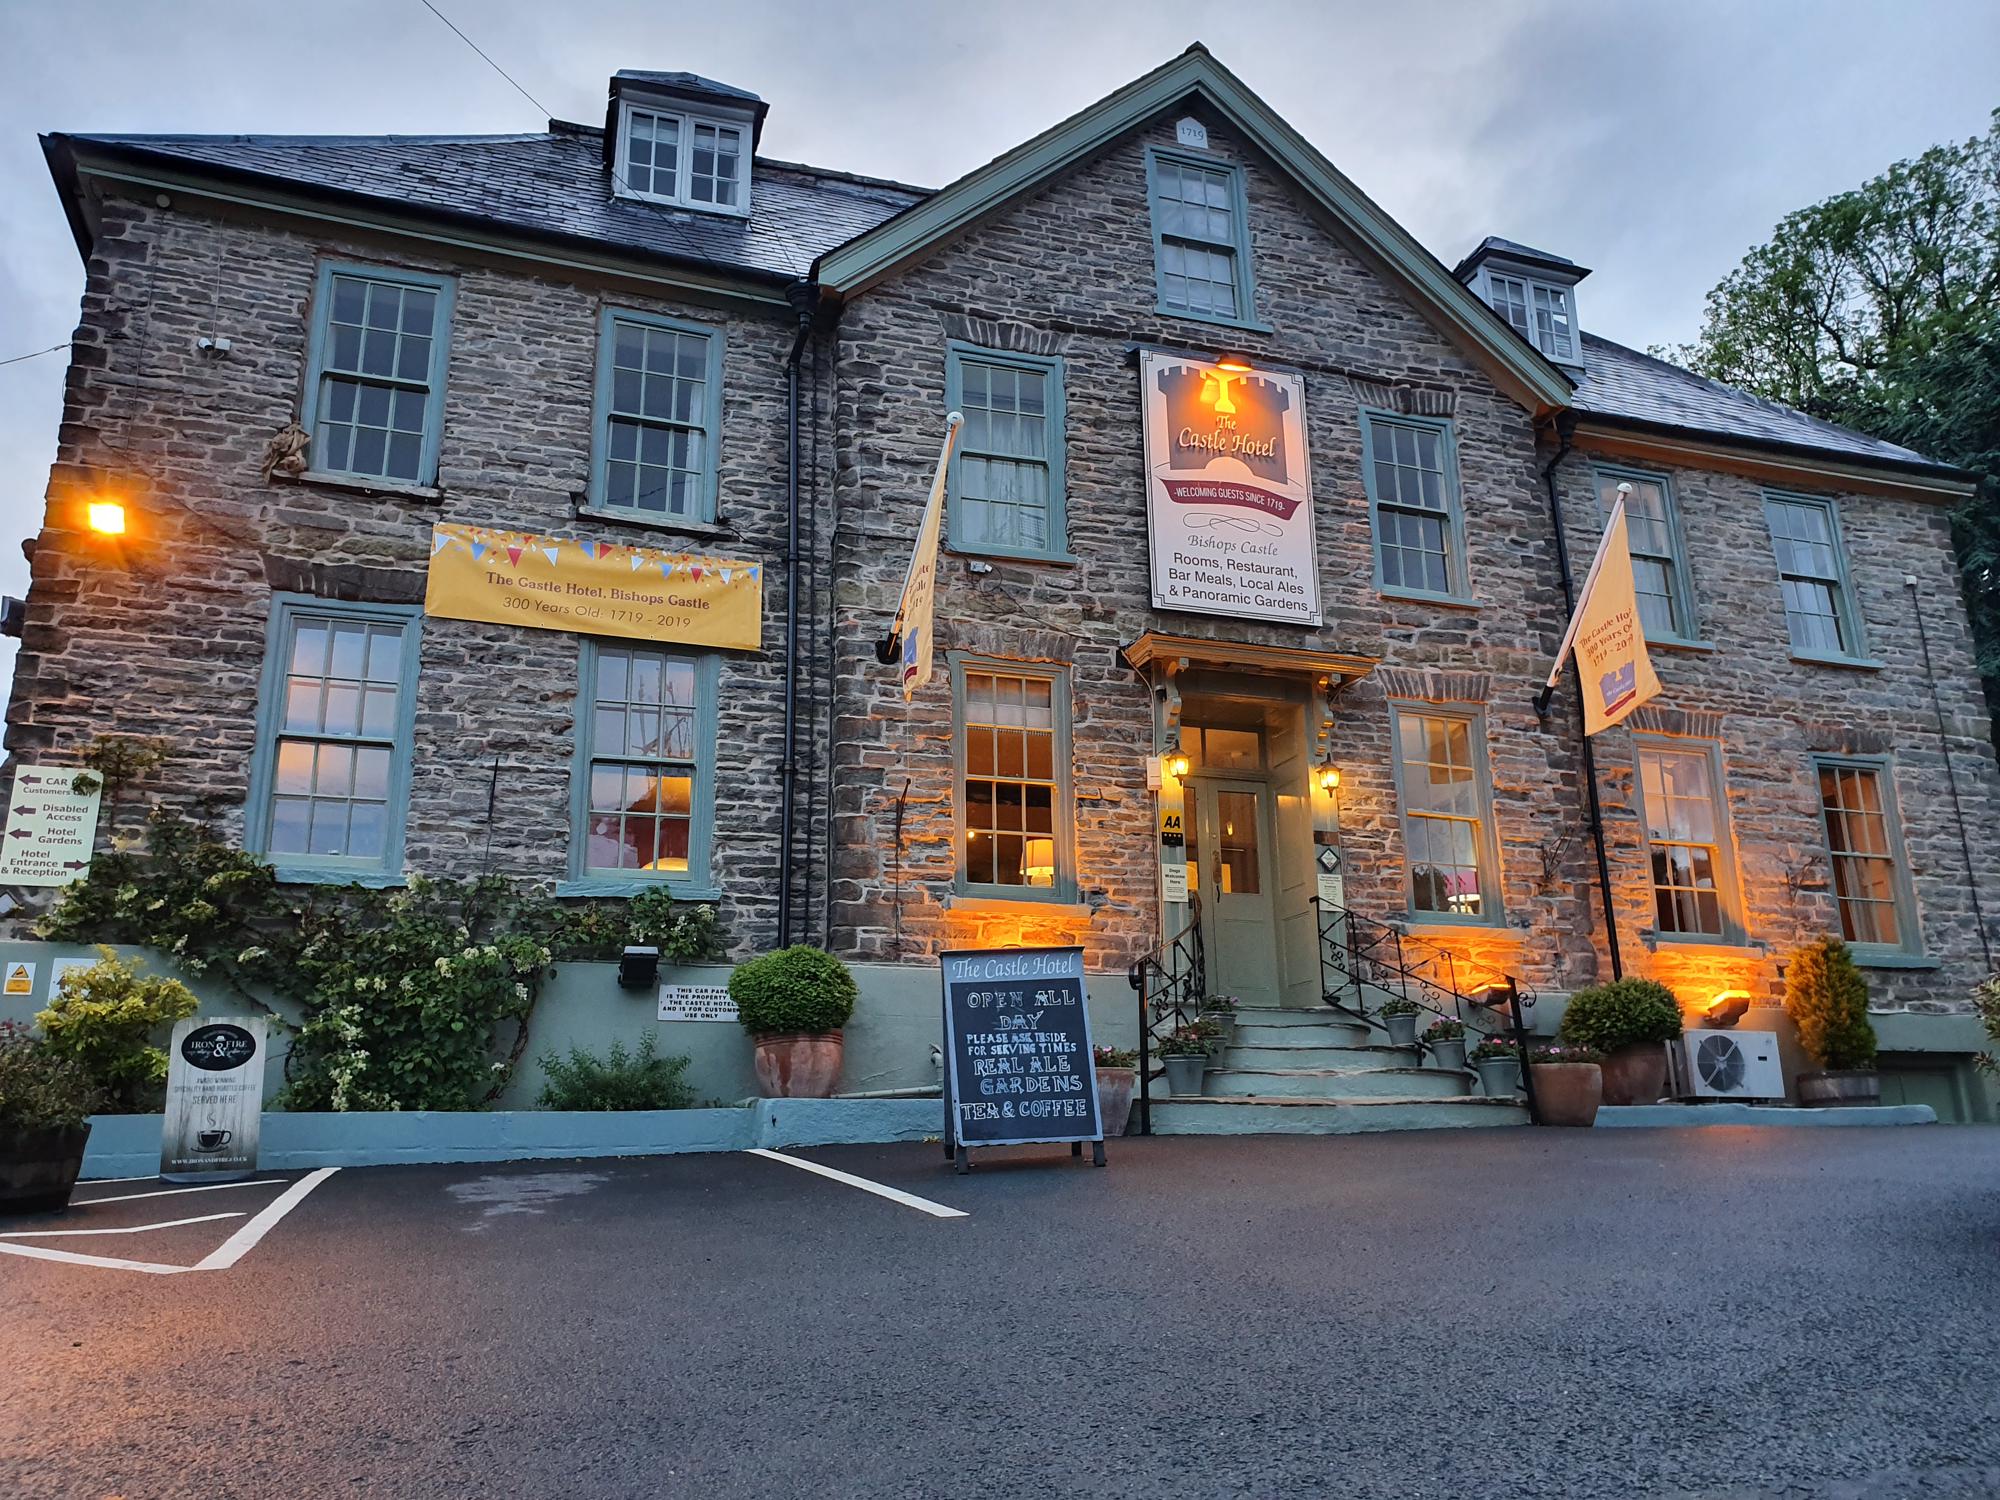 Hotels in Shropshire holidays at Cool Places